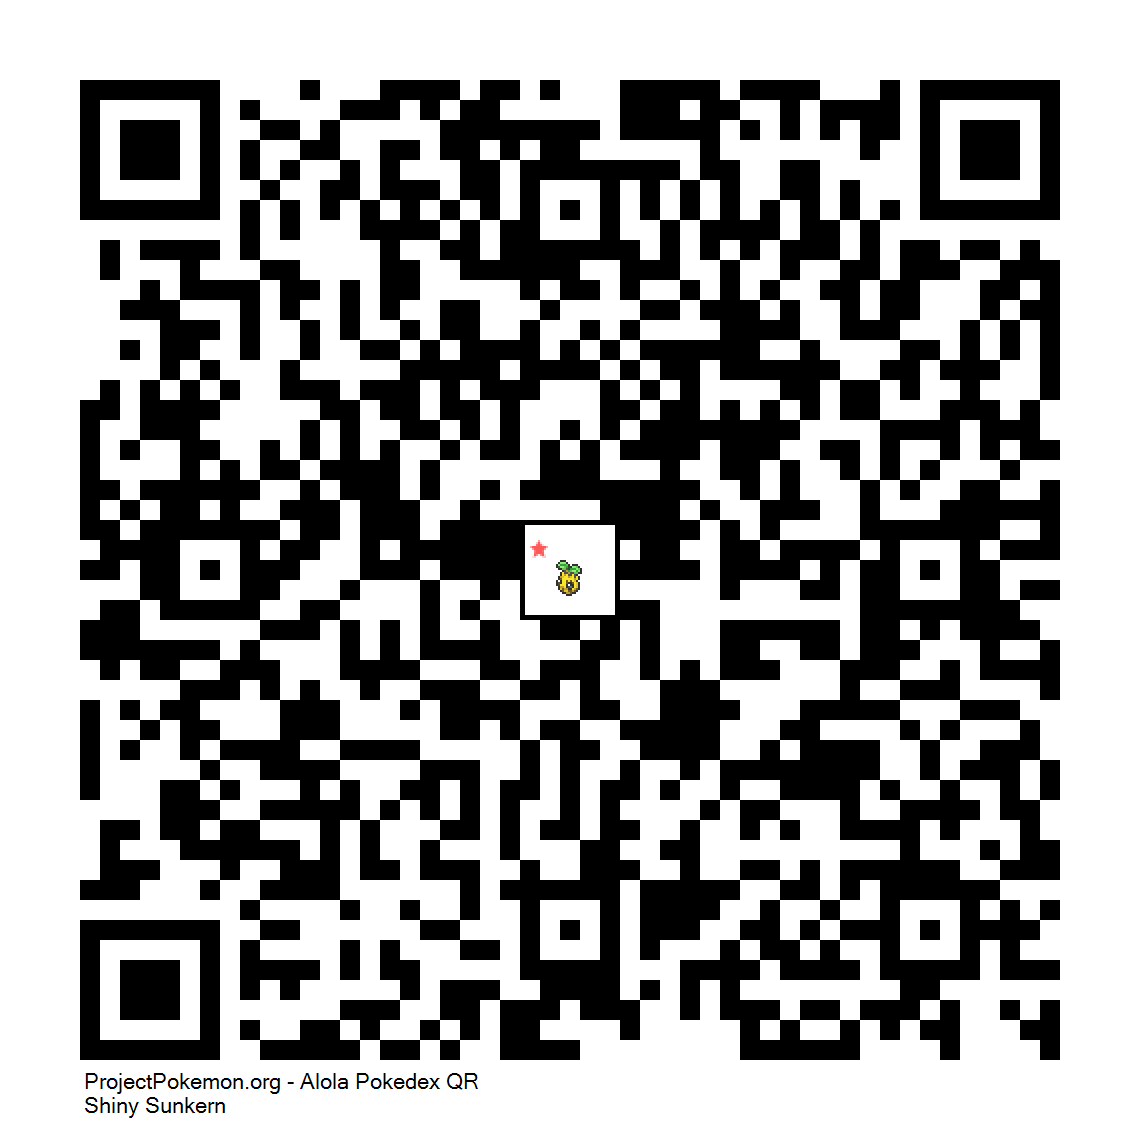 489 - Phione.png - Generation 7 - QR Codes - Project Pokemon Forums